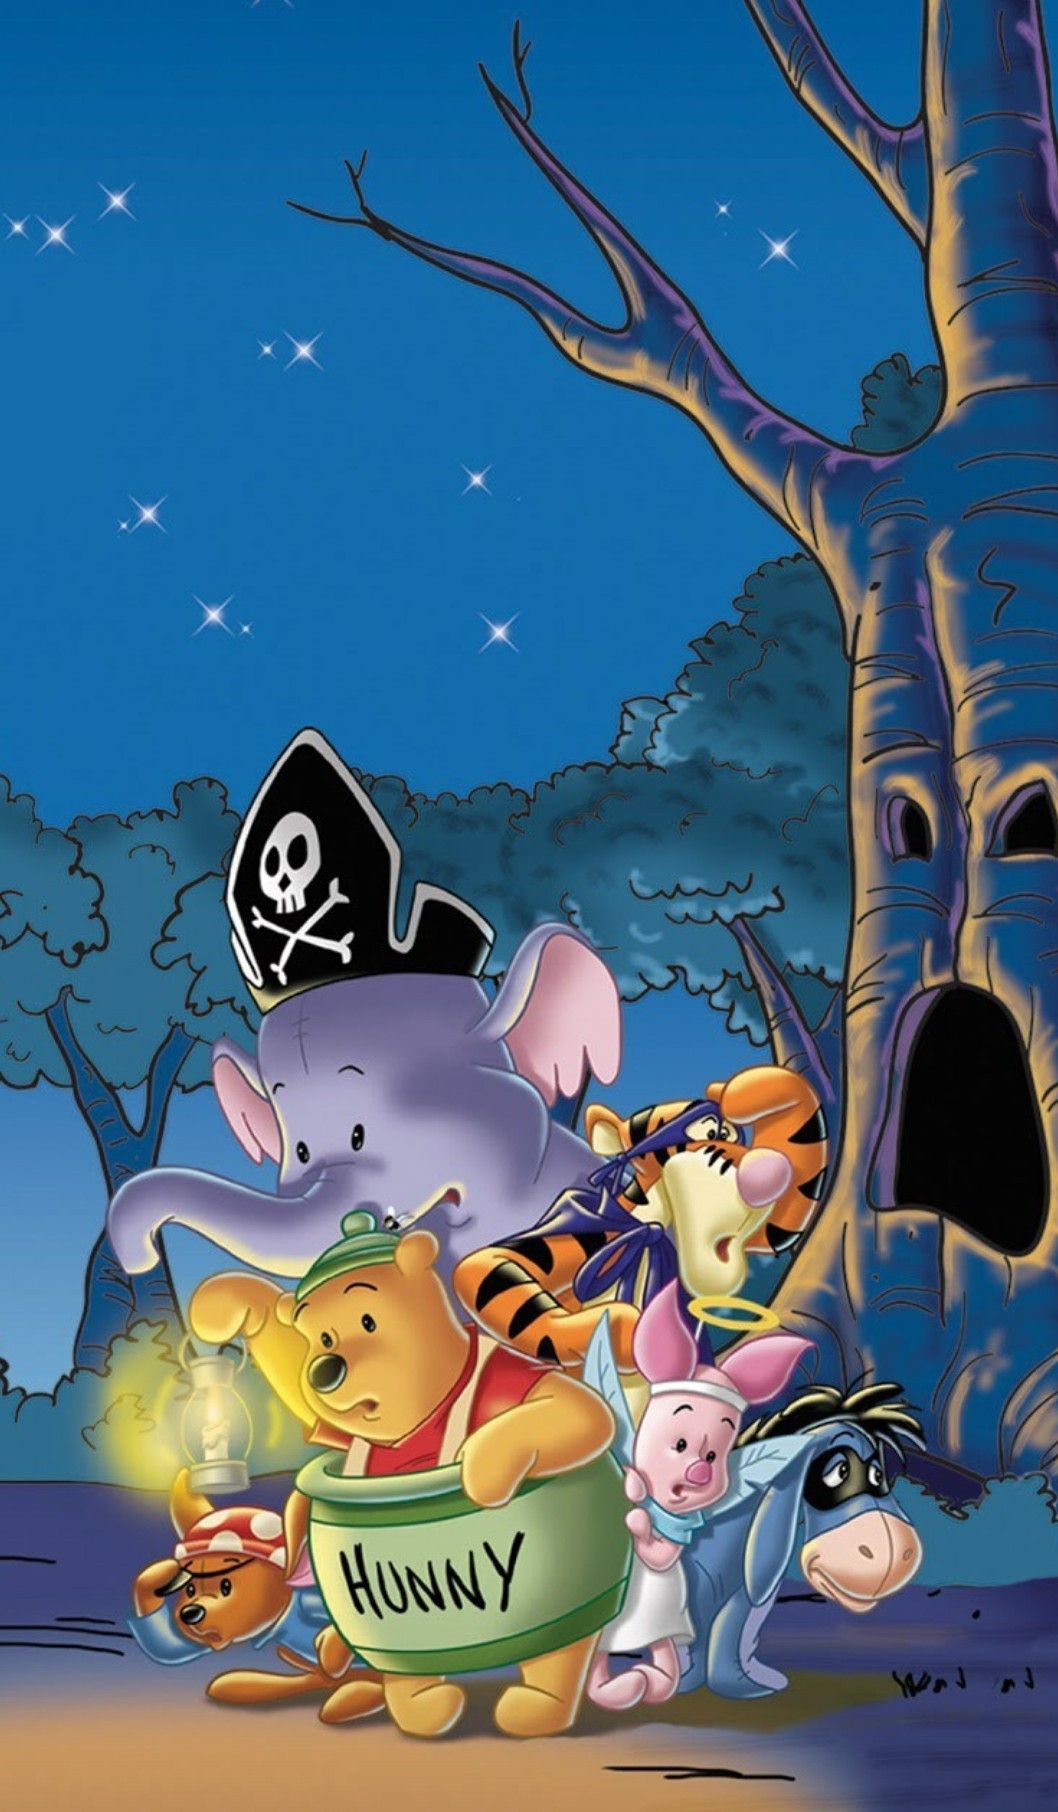 Bambi And Friends. Winnie the pooh halloween, Winnie the pooh picture, Tigger winnie the pooh